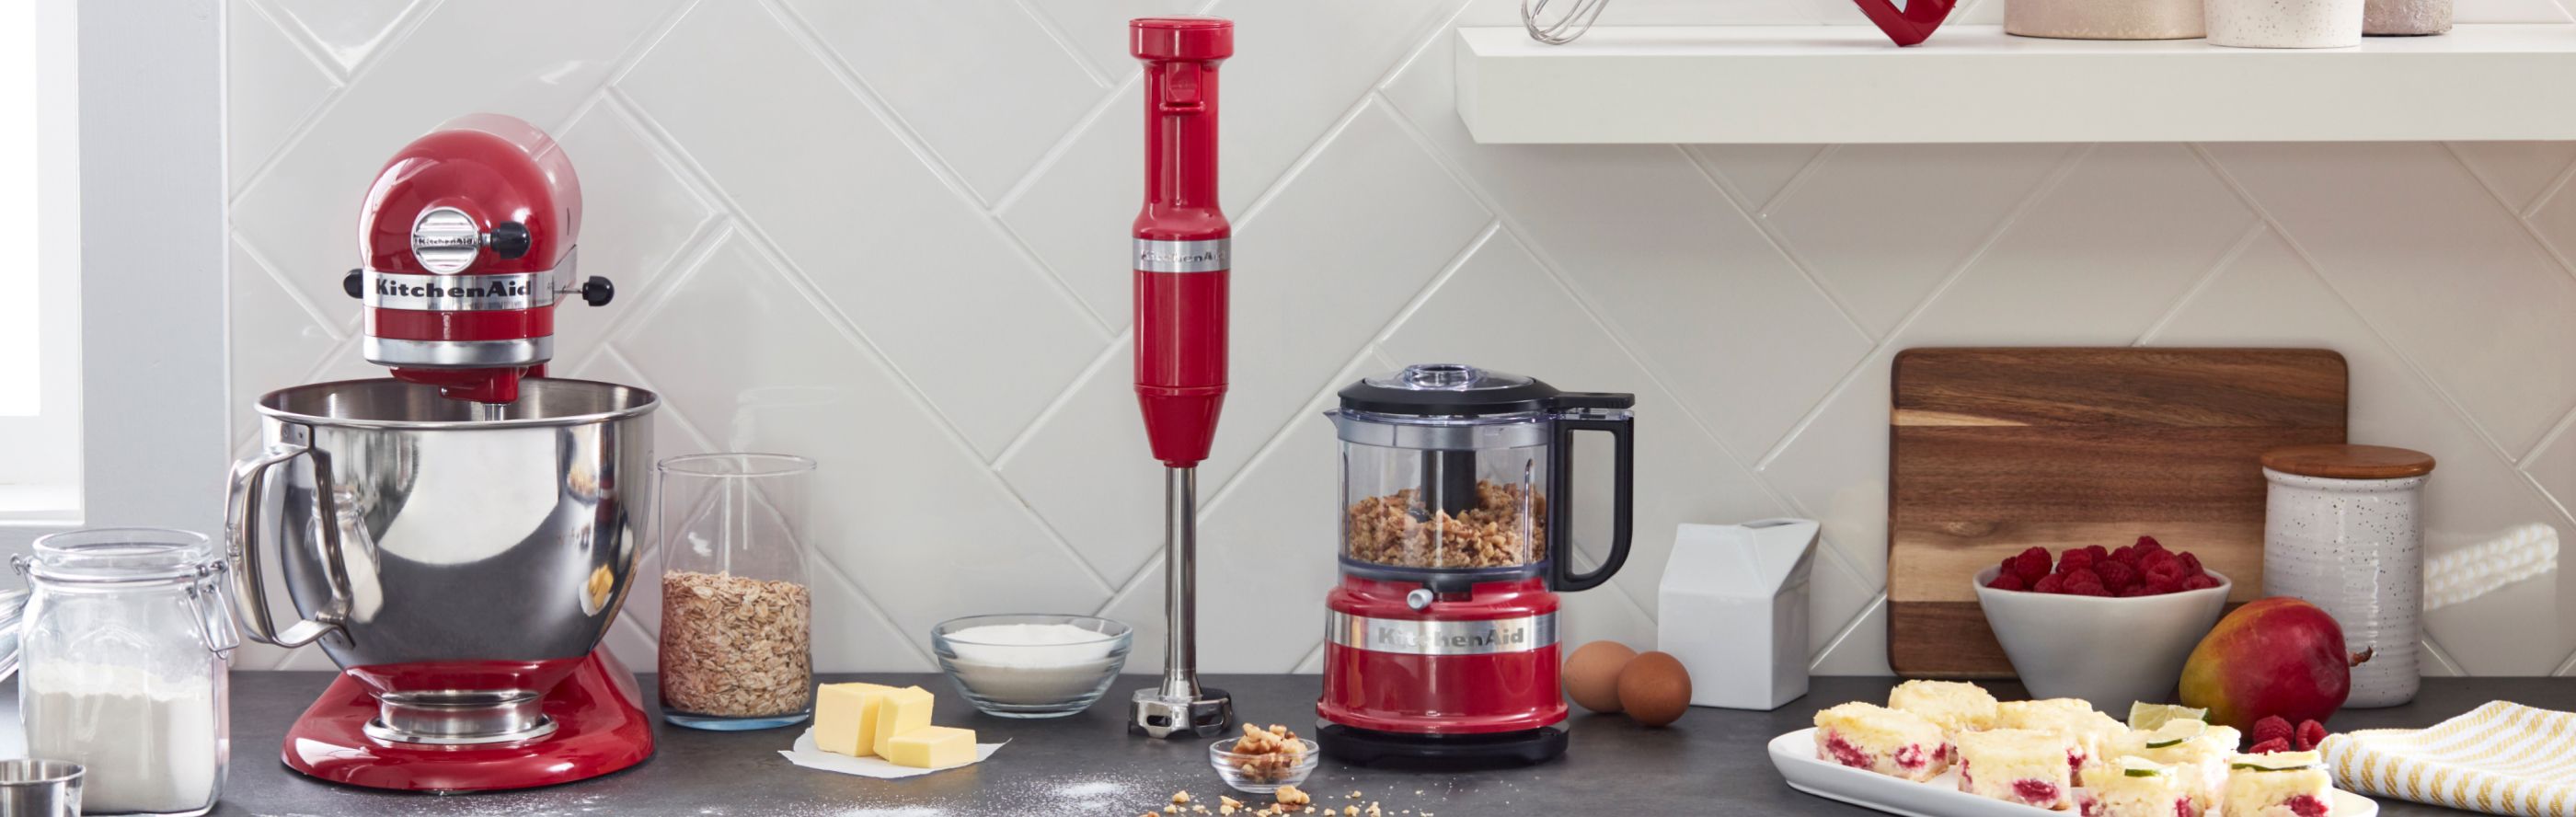 Red food processor next to red immersion blender from KitchenAid brand on counter with ingredients